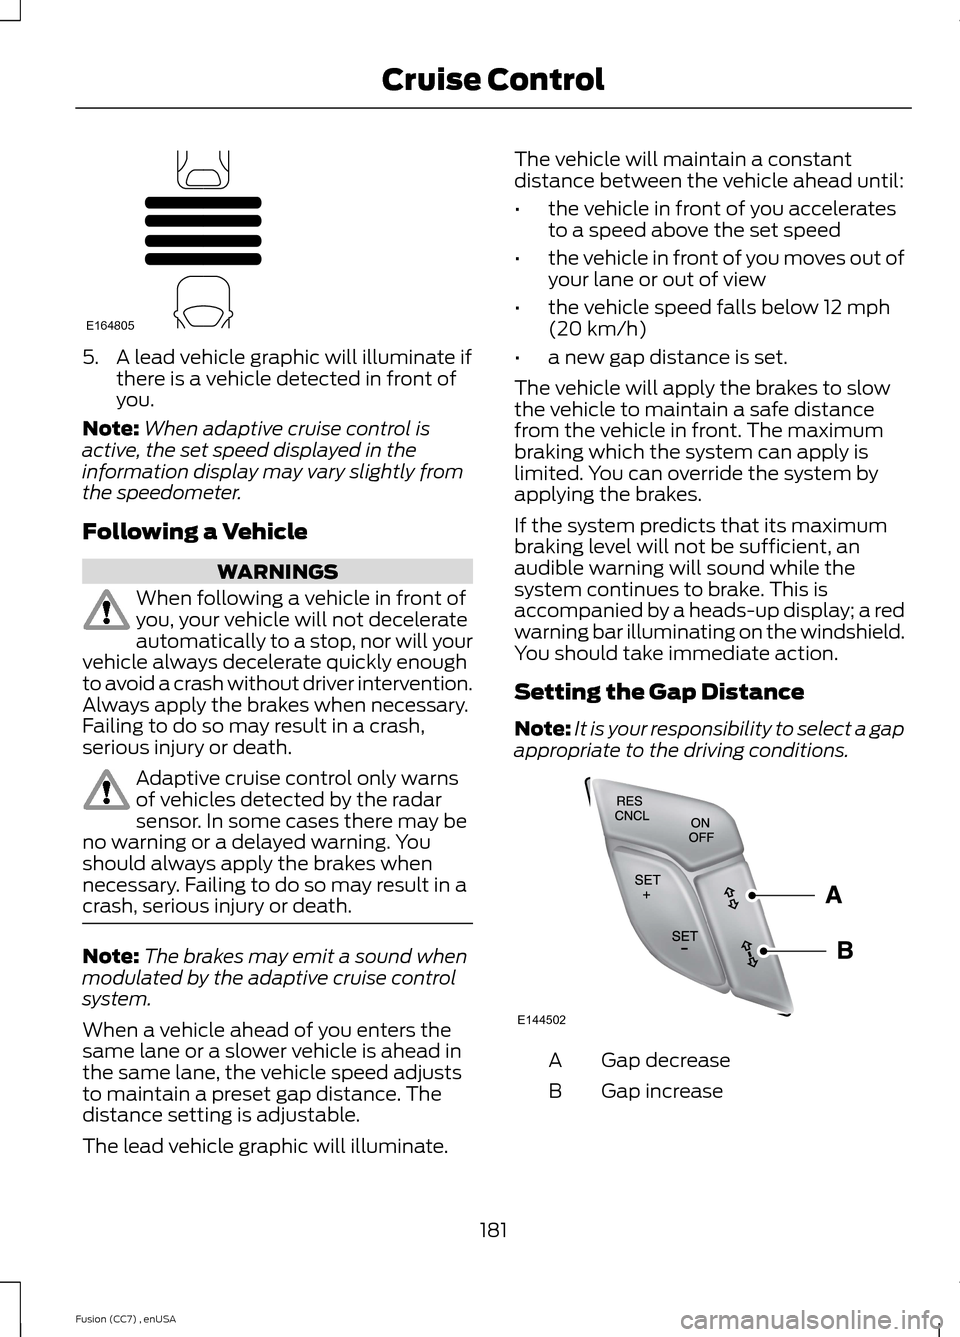 FORD FUSION (AMERICAS) 2014 2.G Owners Manual 5.A lead vehicle graphic will illuminate ifthere is a vehicle detected in front ofyou.
Note:When adaptive cruise control isactive, the set speed displayed in theinformation display may vary slightly f